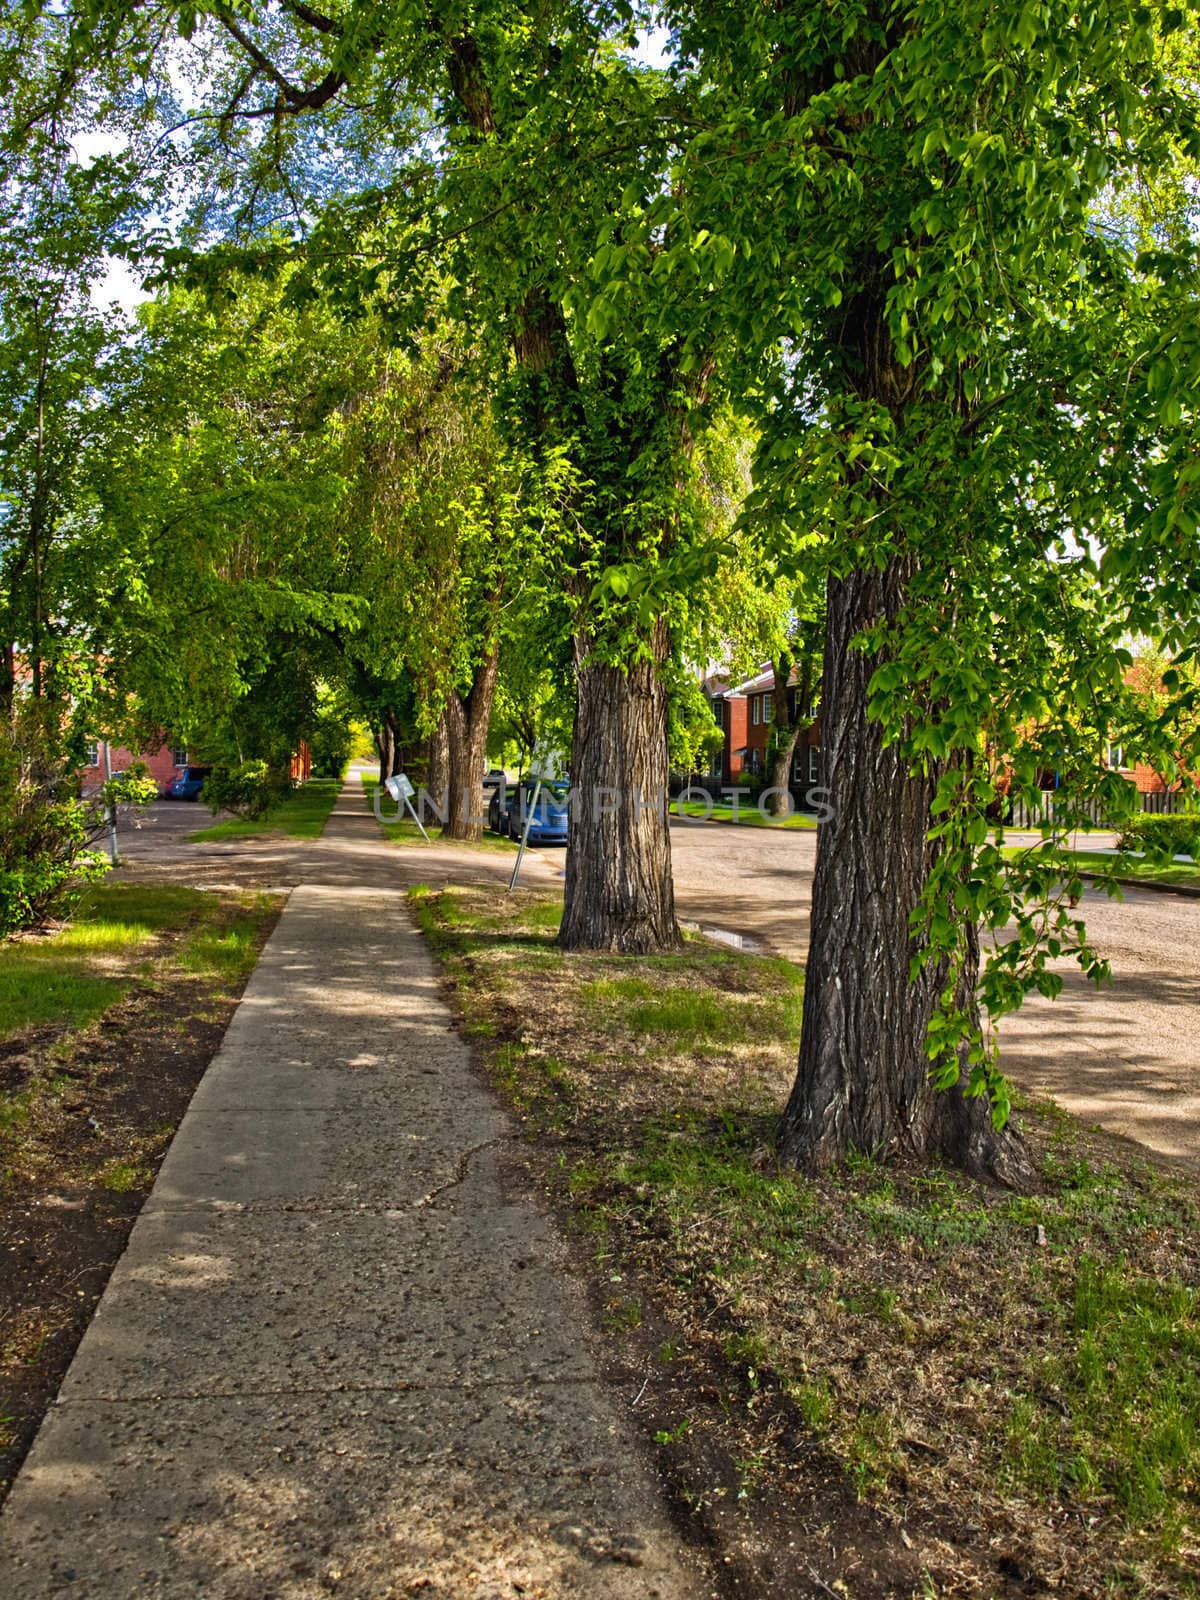 An uban sidewalk shaded by beautiful trees in the summer afternoon.